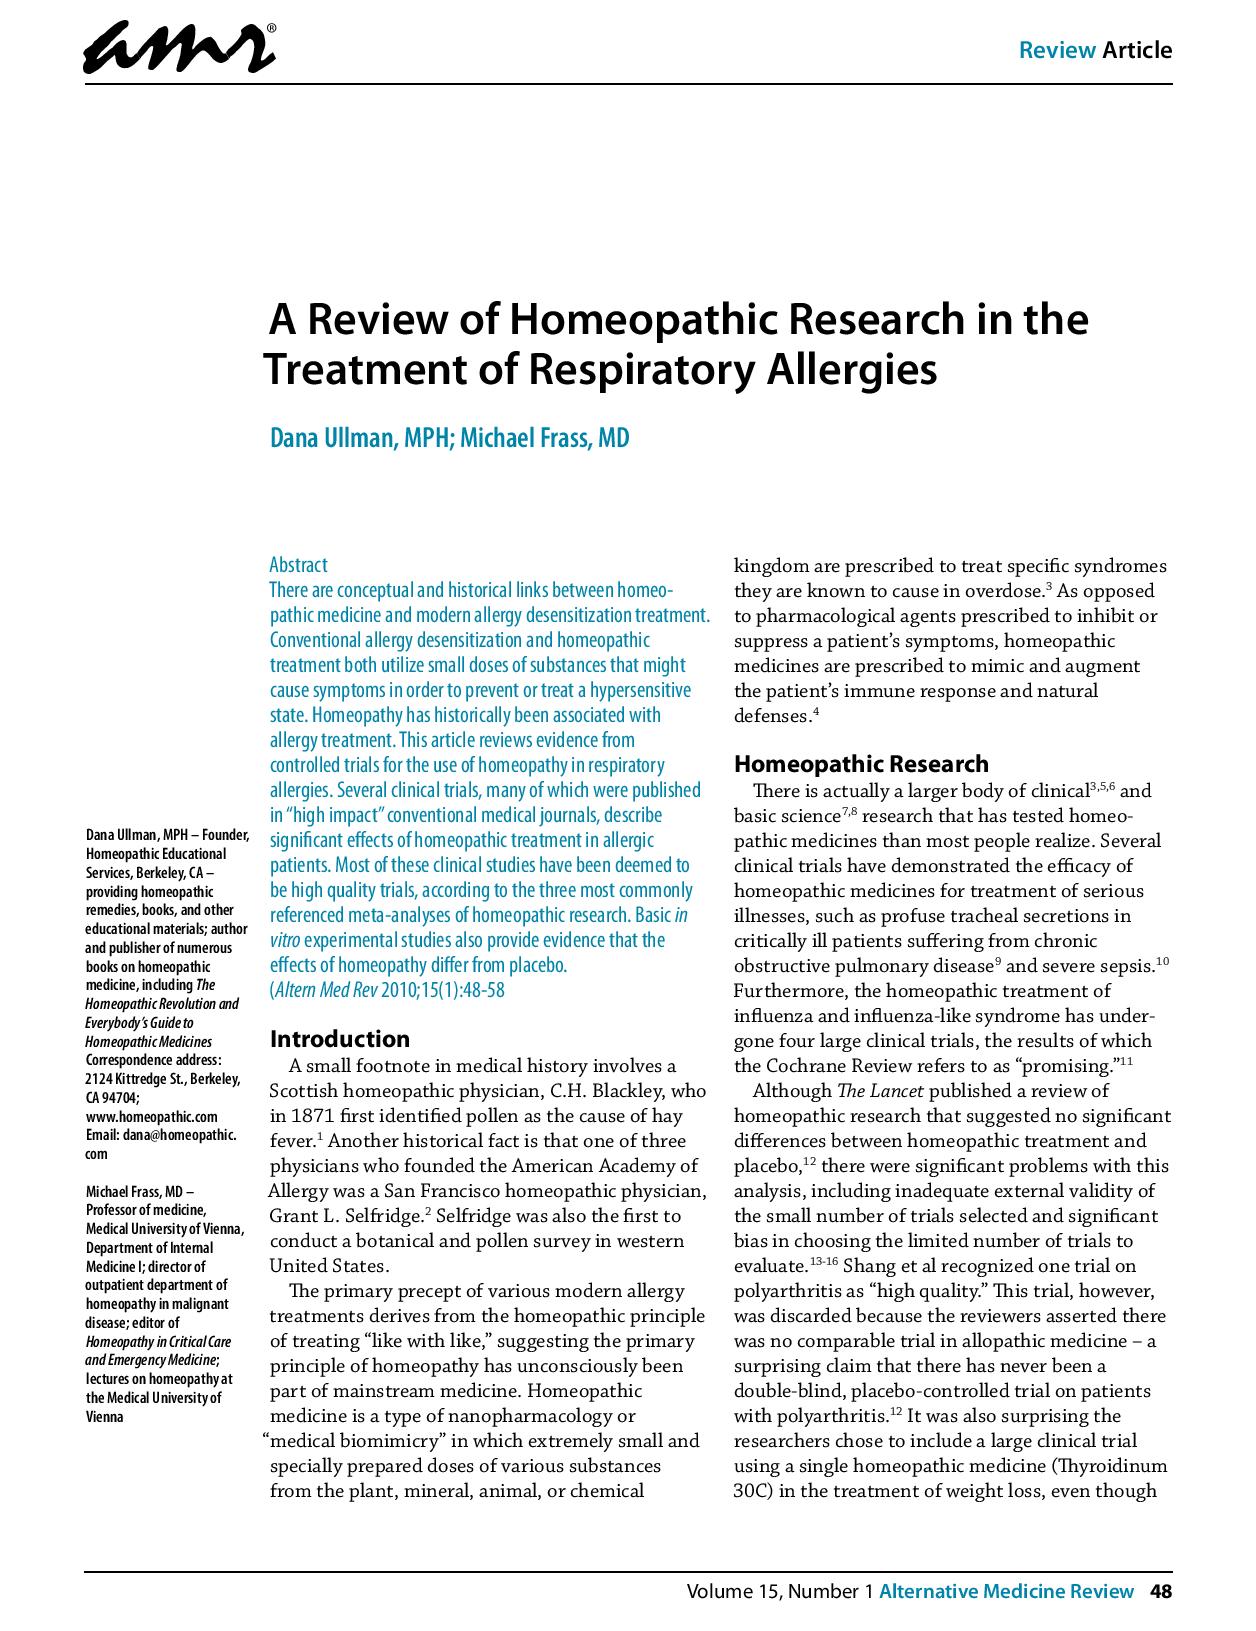 A review of homeopathic research in the treatment of respiratory allergies 2010 page 001